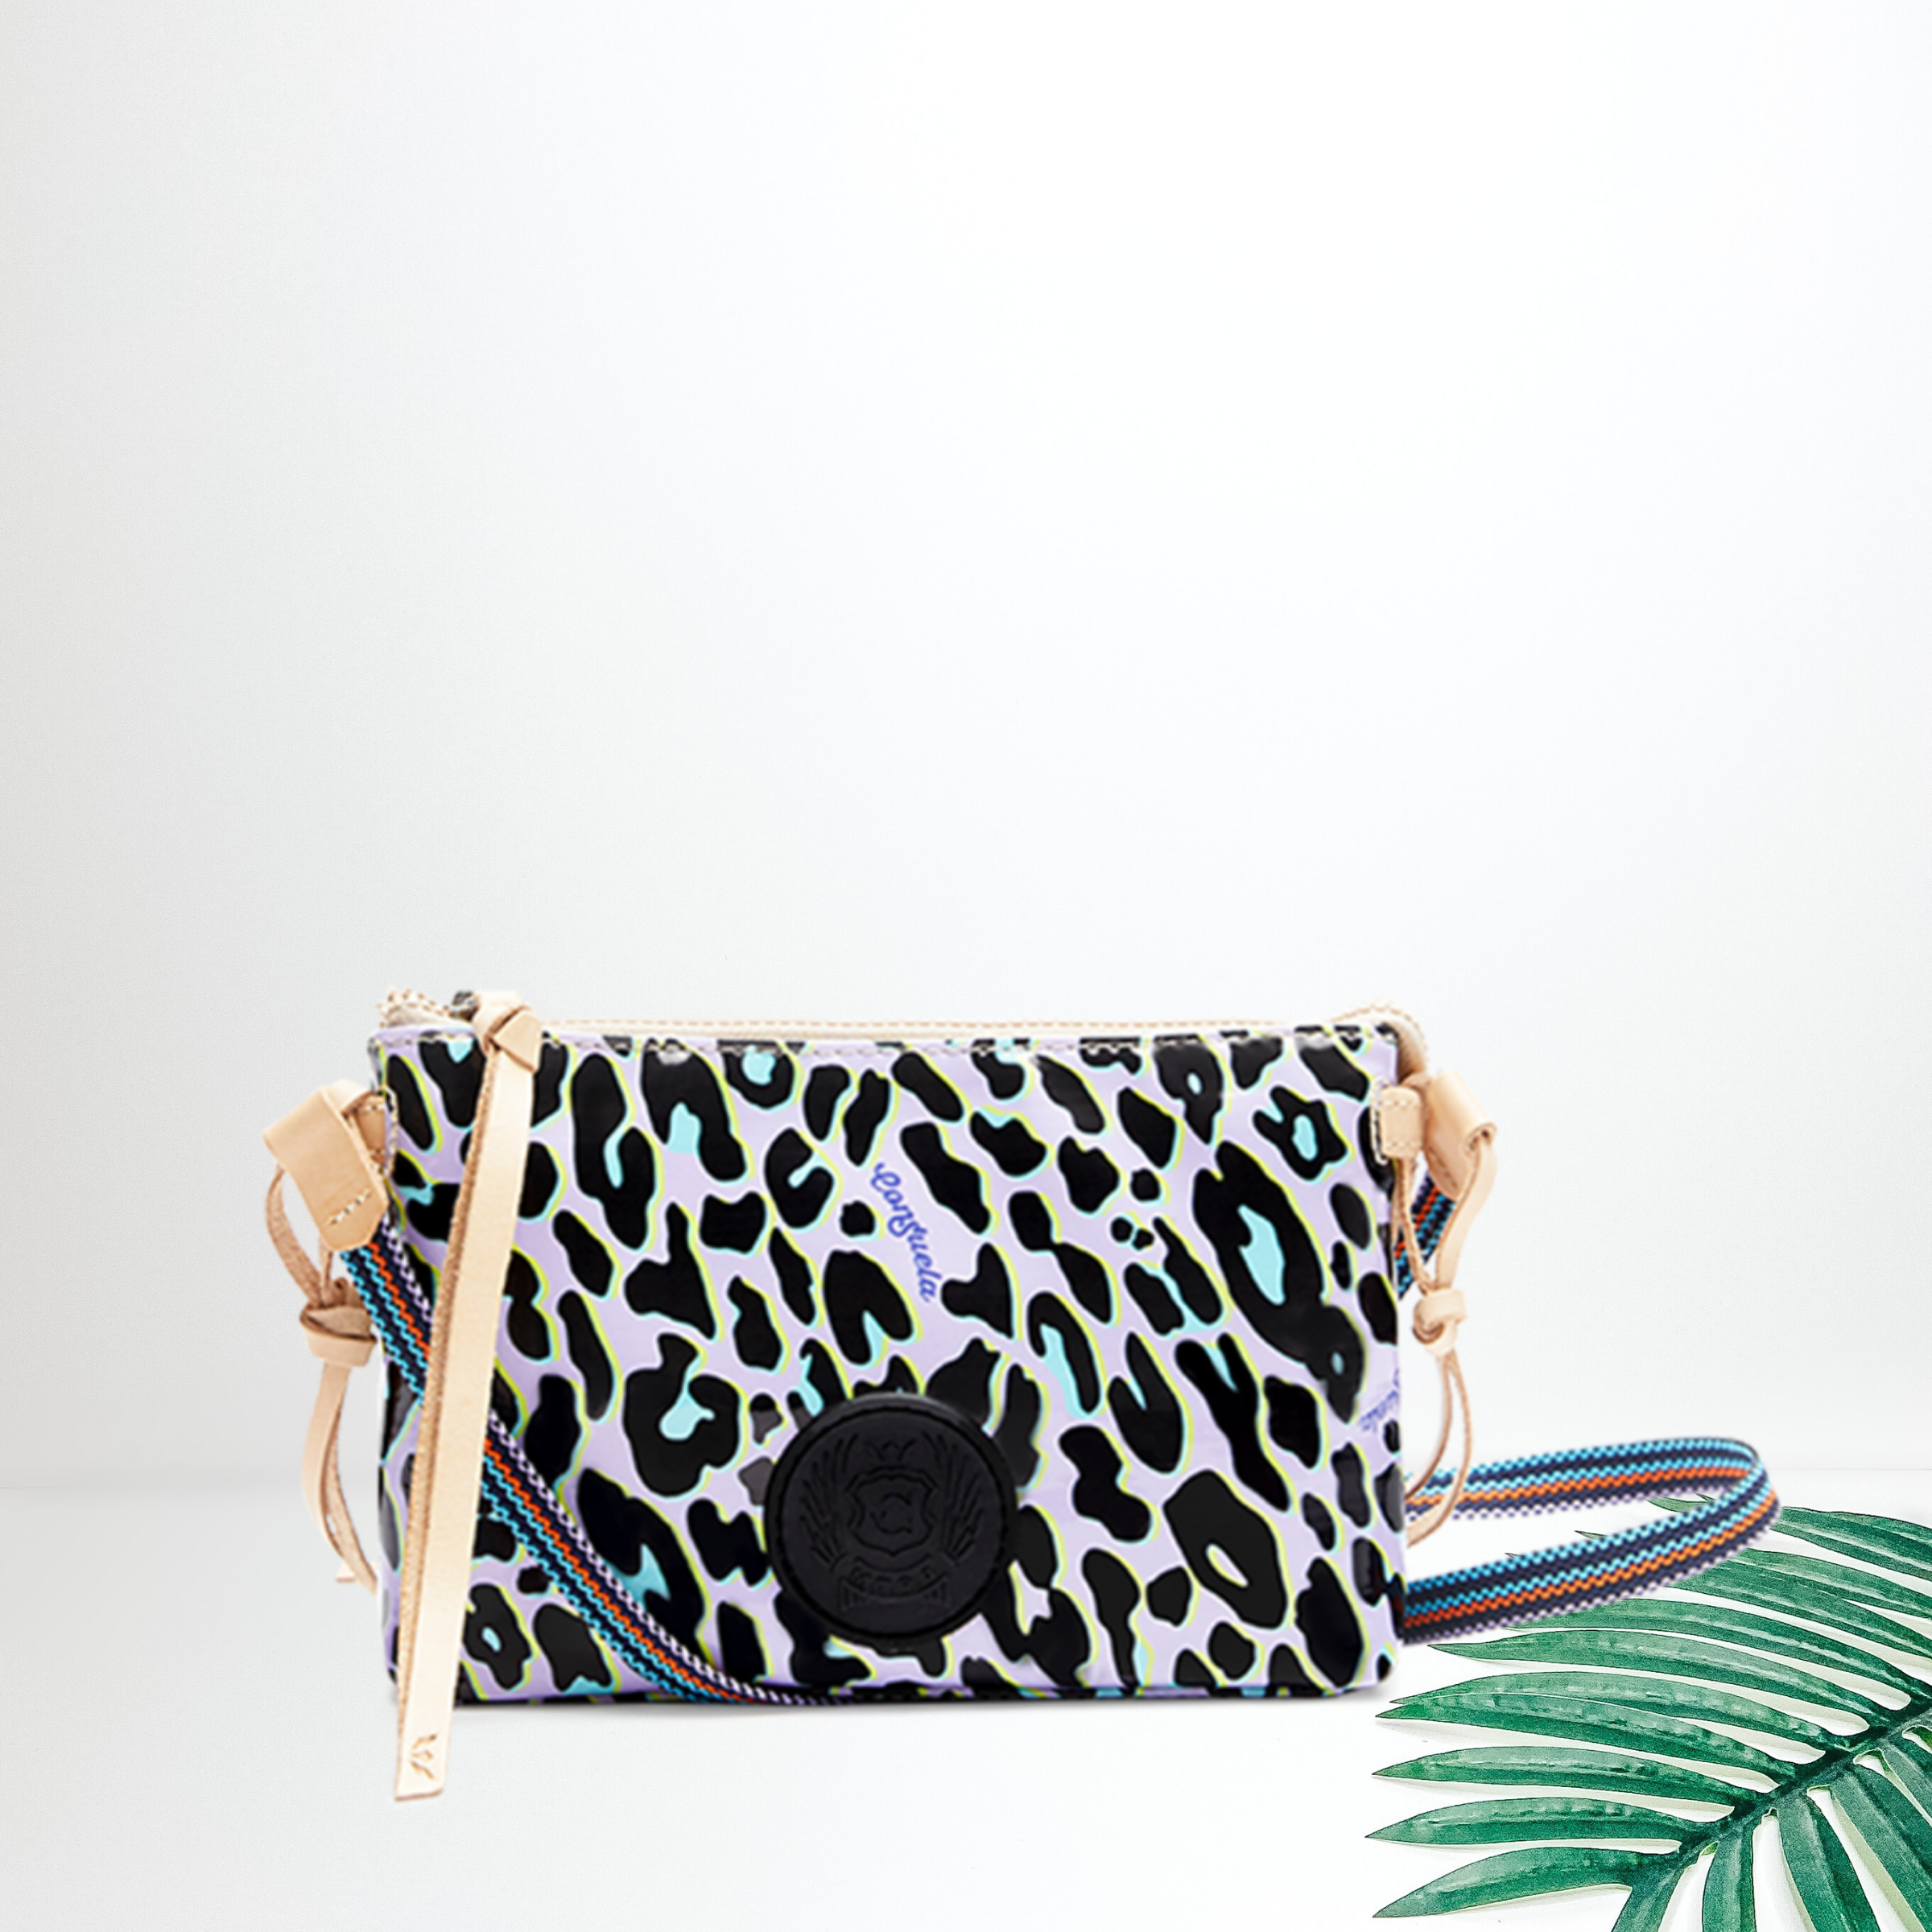 A purple leopard print crossbody bag pictured on white background with a palm leaf.